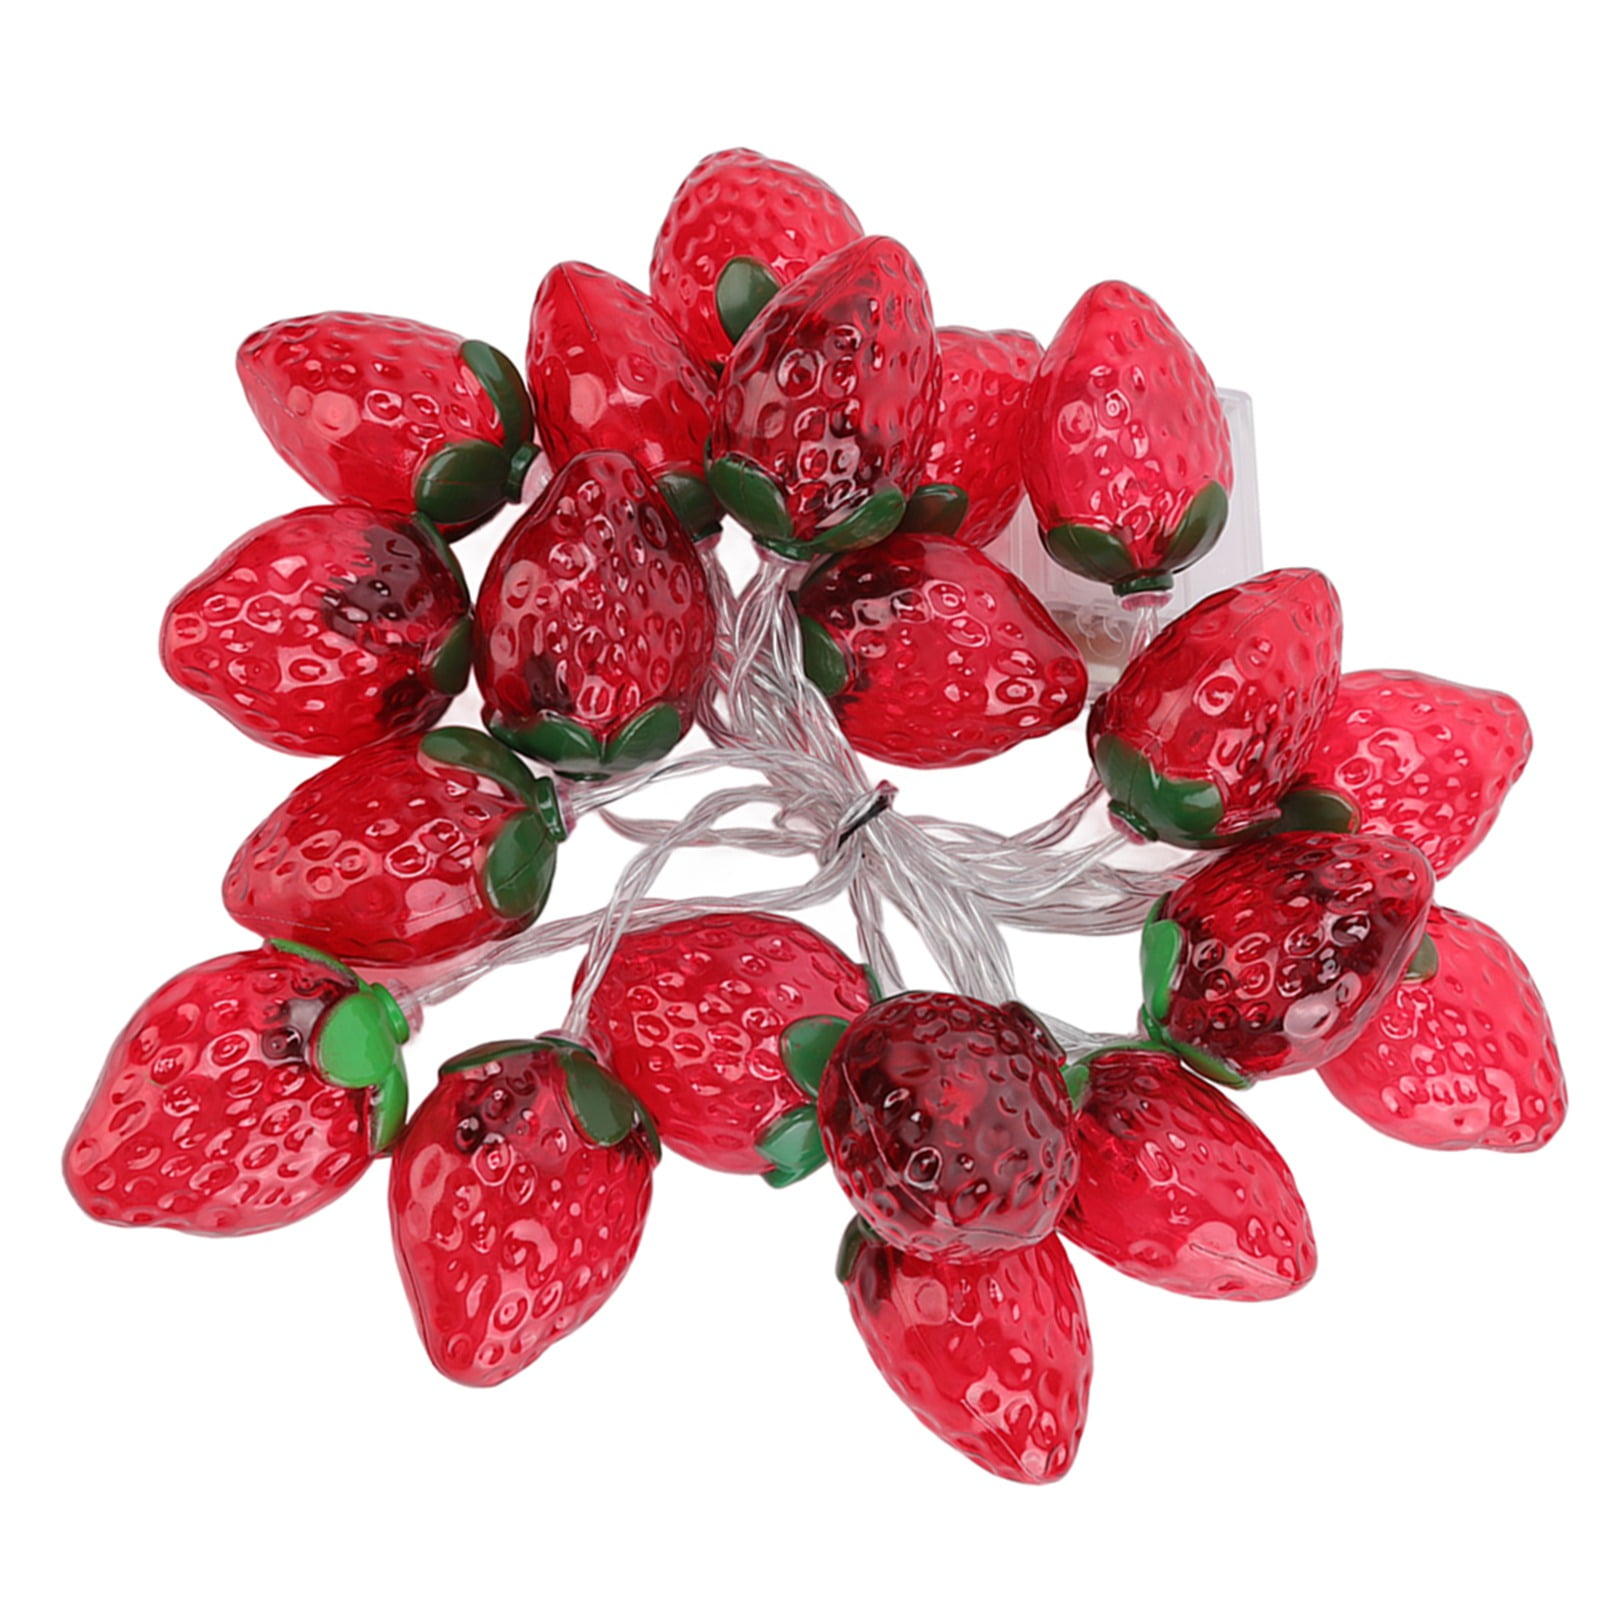 FAGINEY Strawberry String Lights,LED Fruit String Lights,9.8ft 20LEDs Fruit  String Lights Battery Operated Strawberry Lamp String Lights For Christmas  Parties 